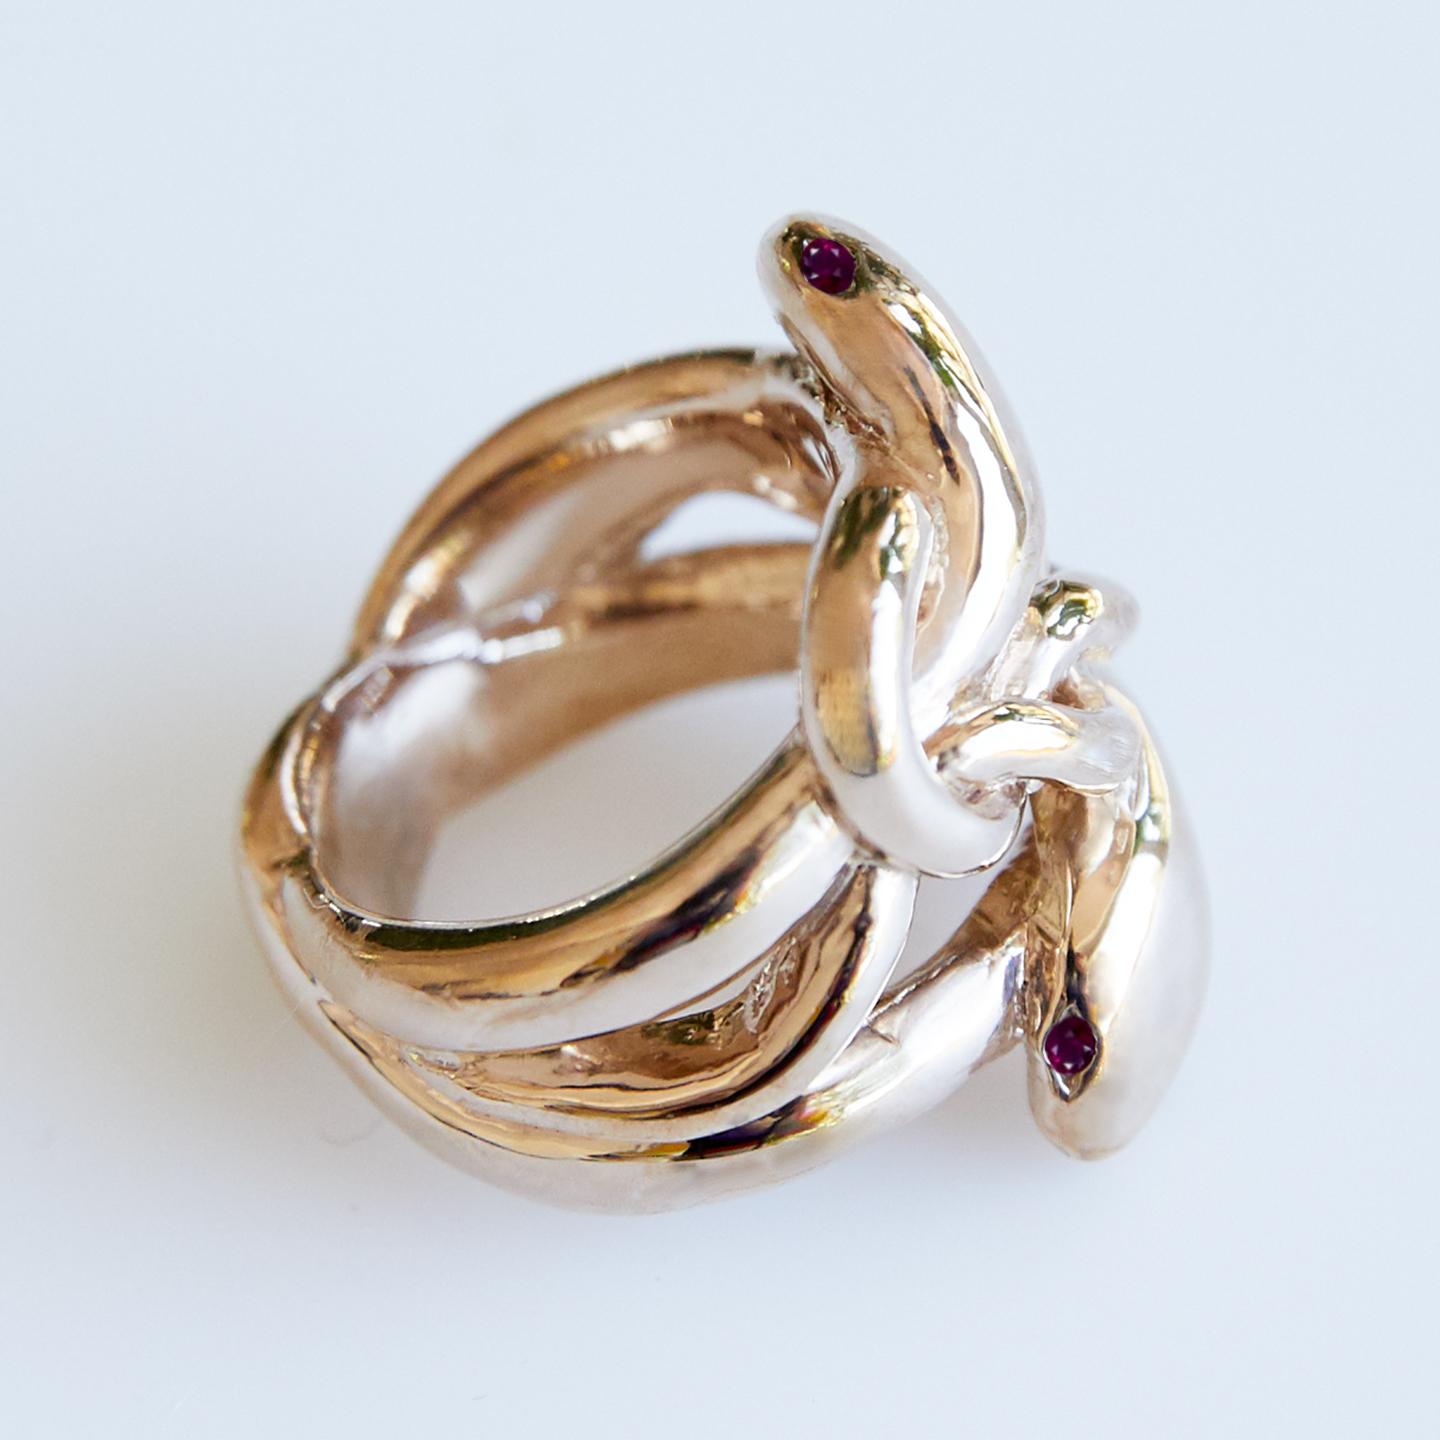 Ruby Gold Snake Ring Victorian Style Cocktail Ring J Dauphin
J DAUPHIN 